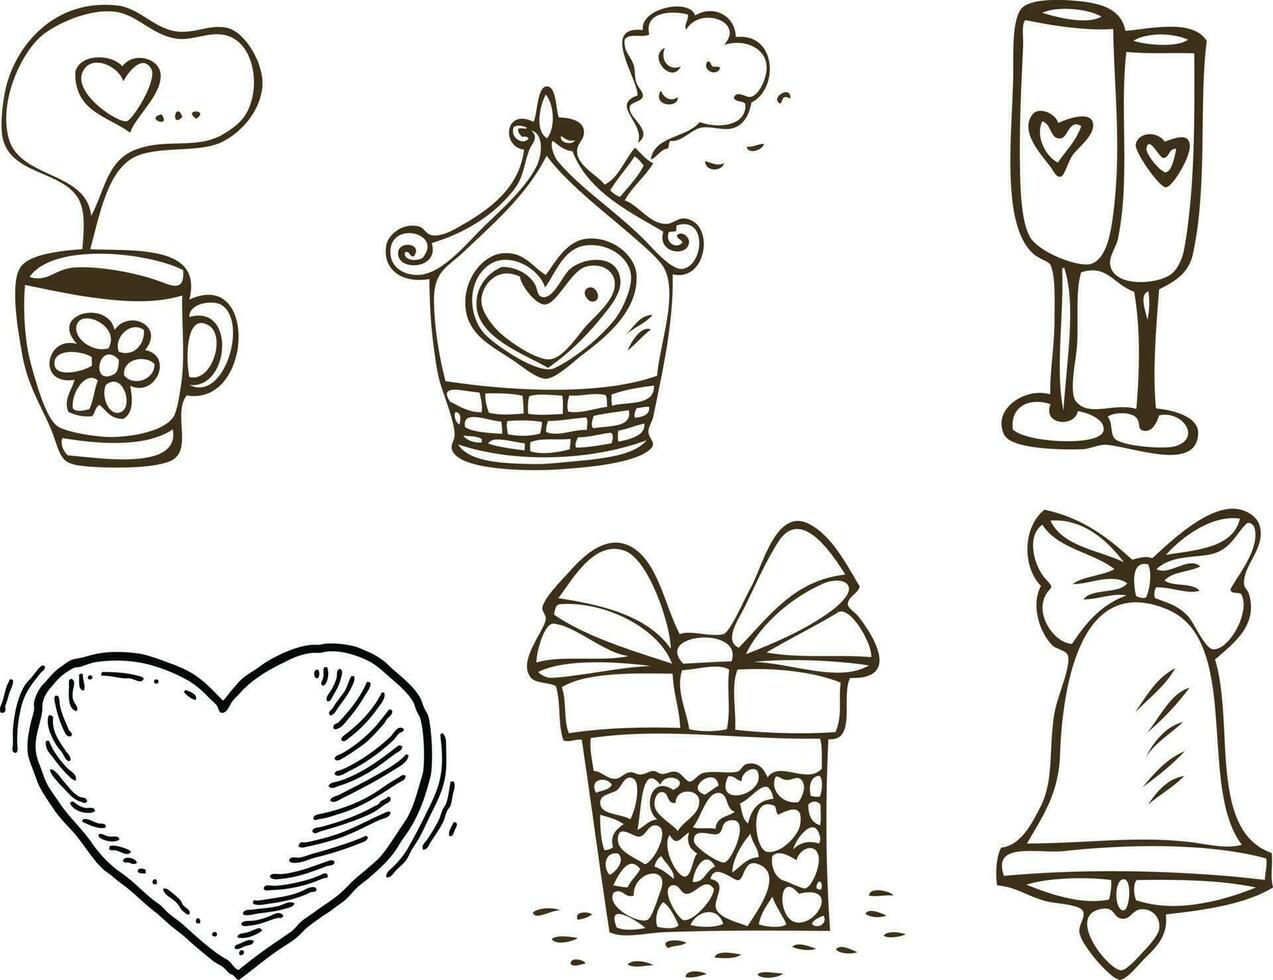 Set of hand drawn doodle valentines day icons. Vector illustration